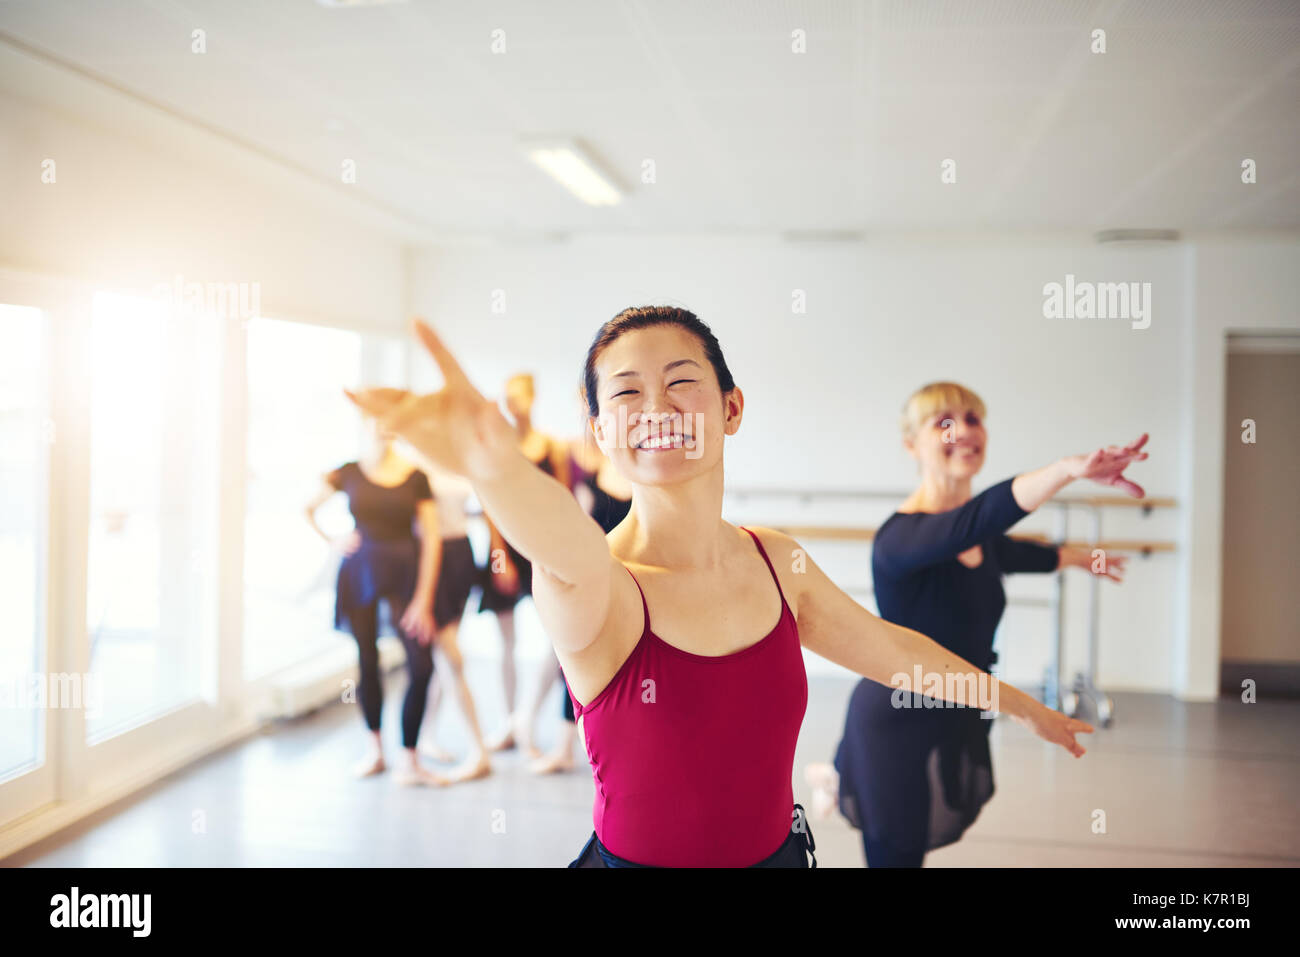 Smiling young Asian dance instructor leading a group of senior women during a ballet class in a dance studio Stock Photo